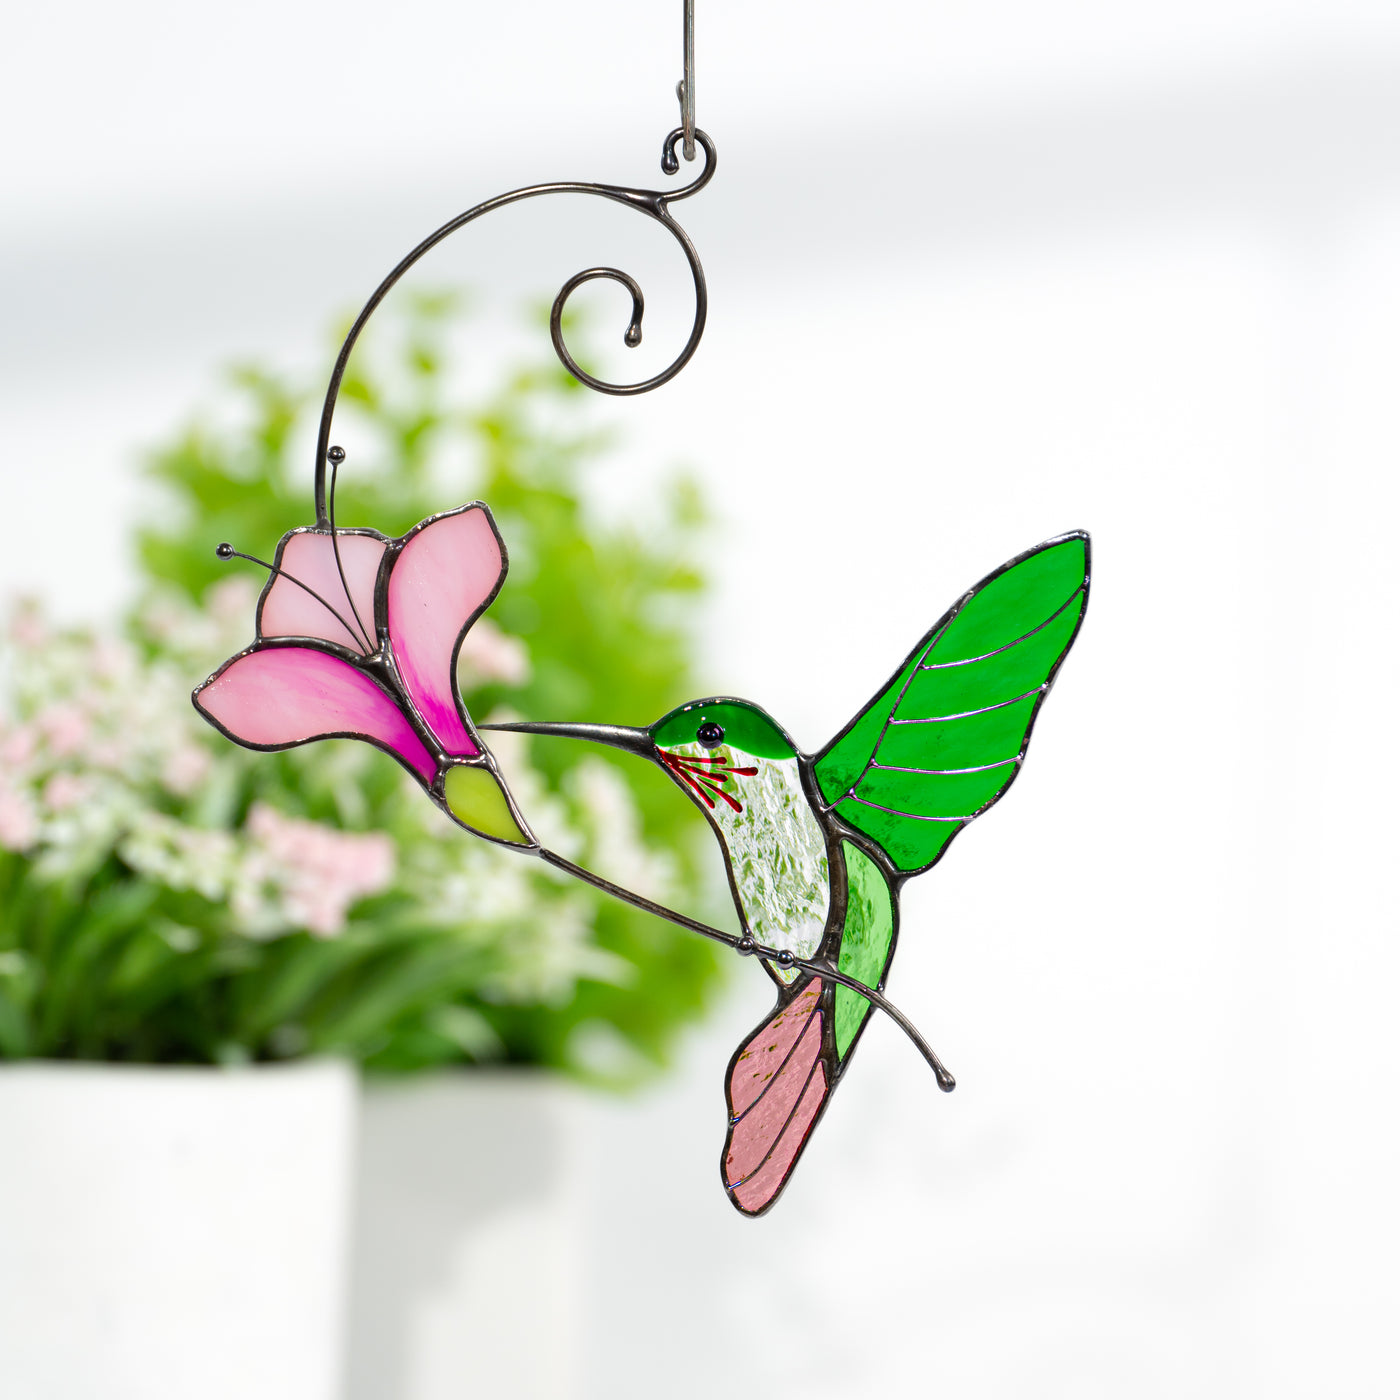 Stained glass window hanging of a green hummingbird with purplish flower